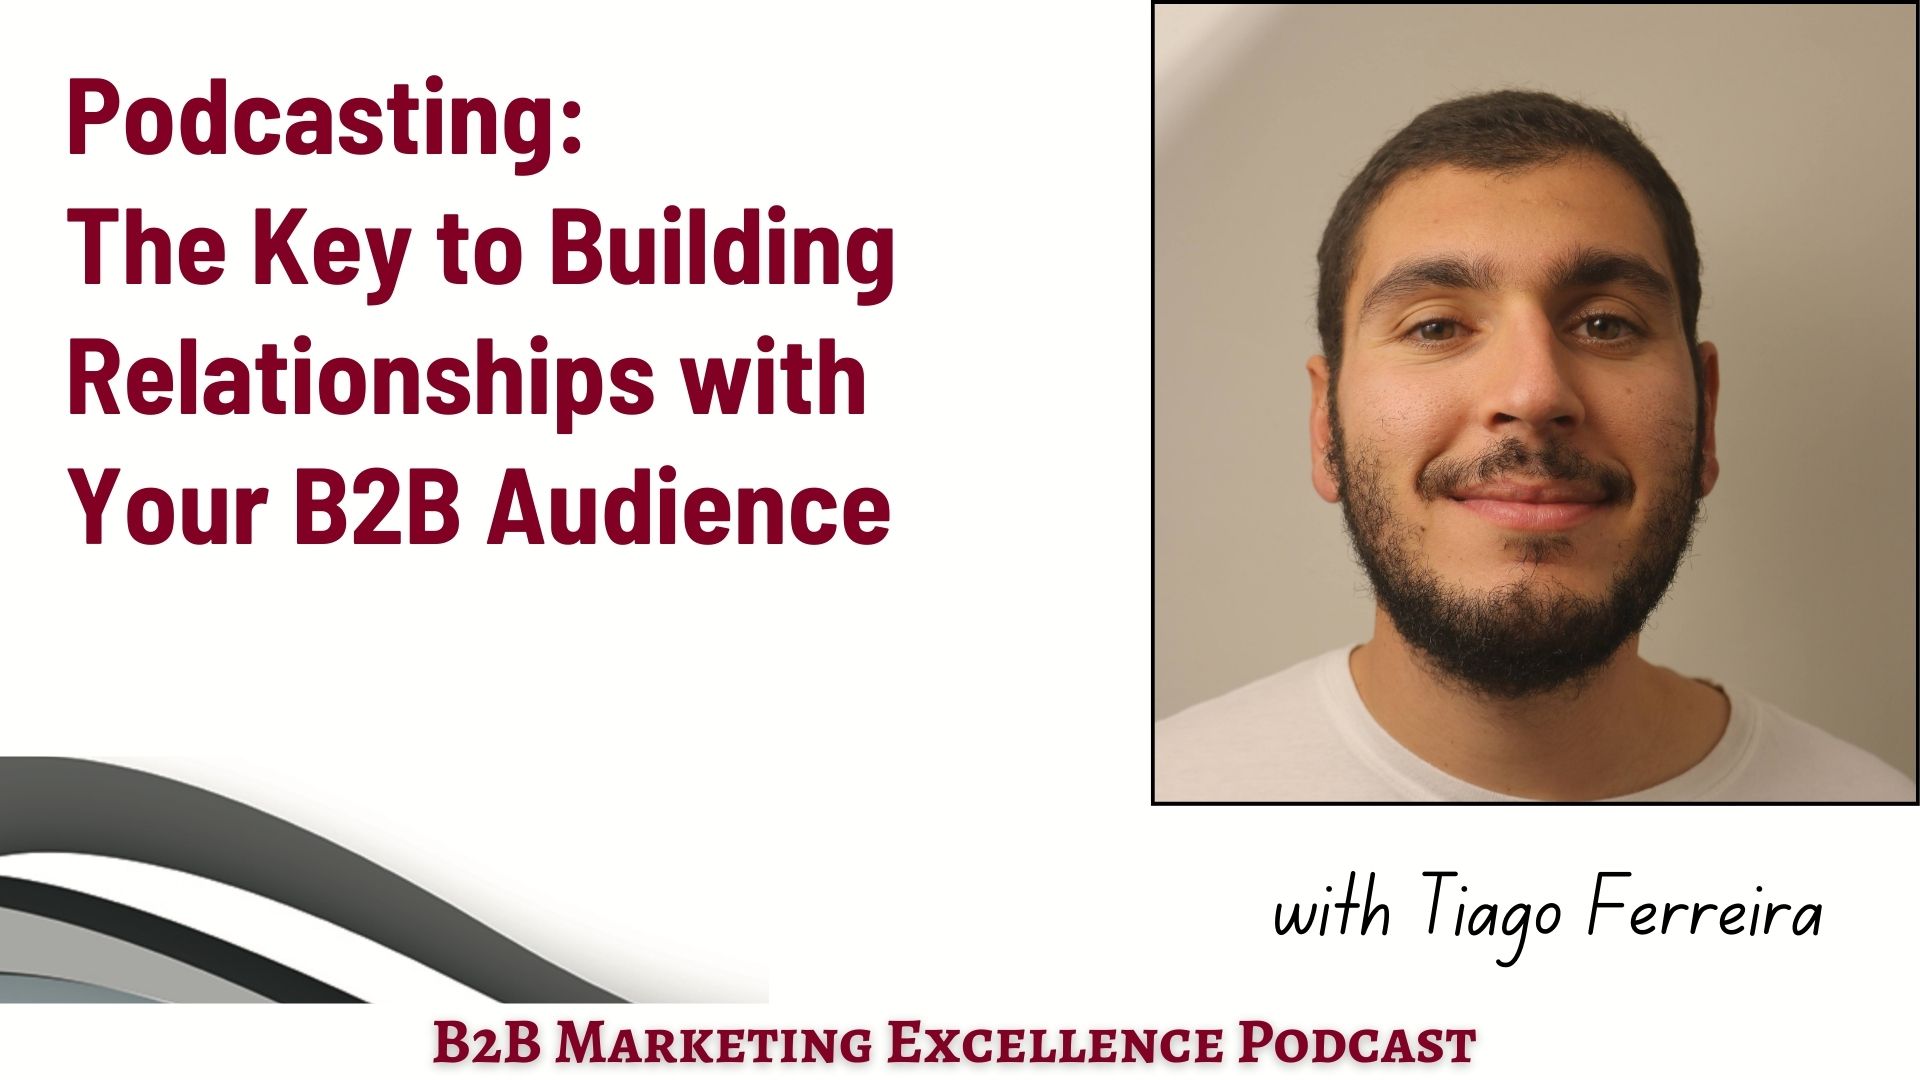 Podcast – Podcasting: The Key to Building Relationships with Your B2B Audience